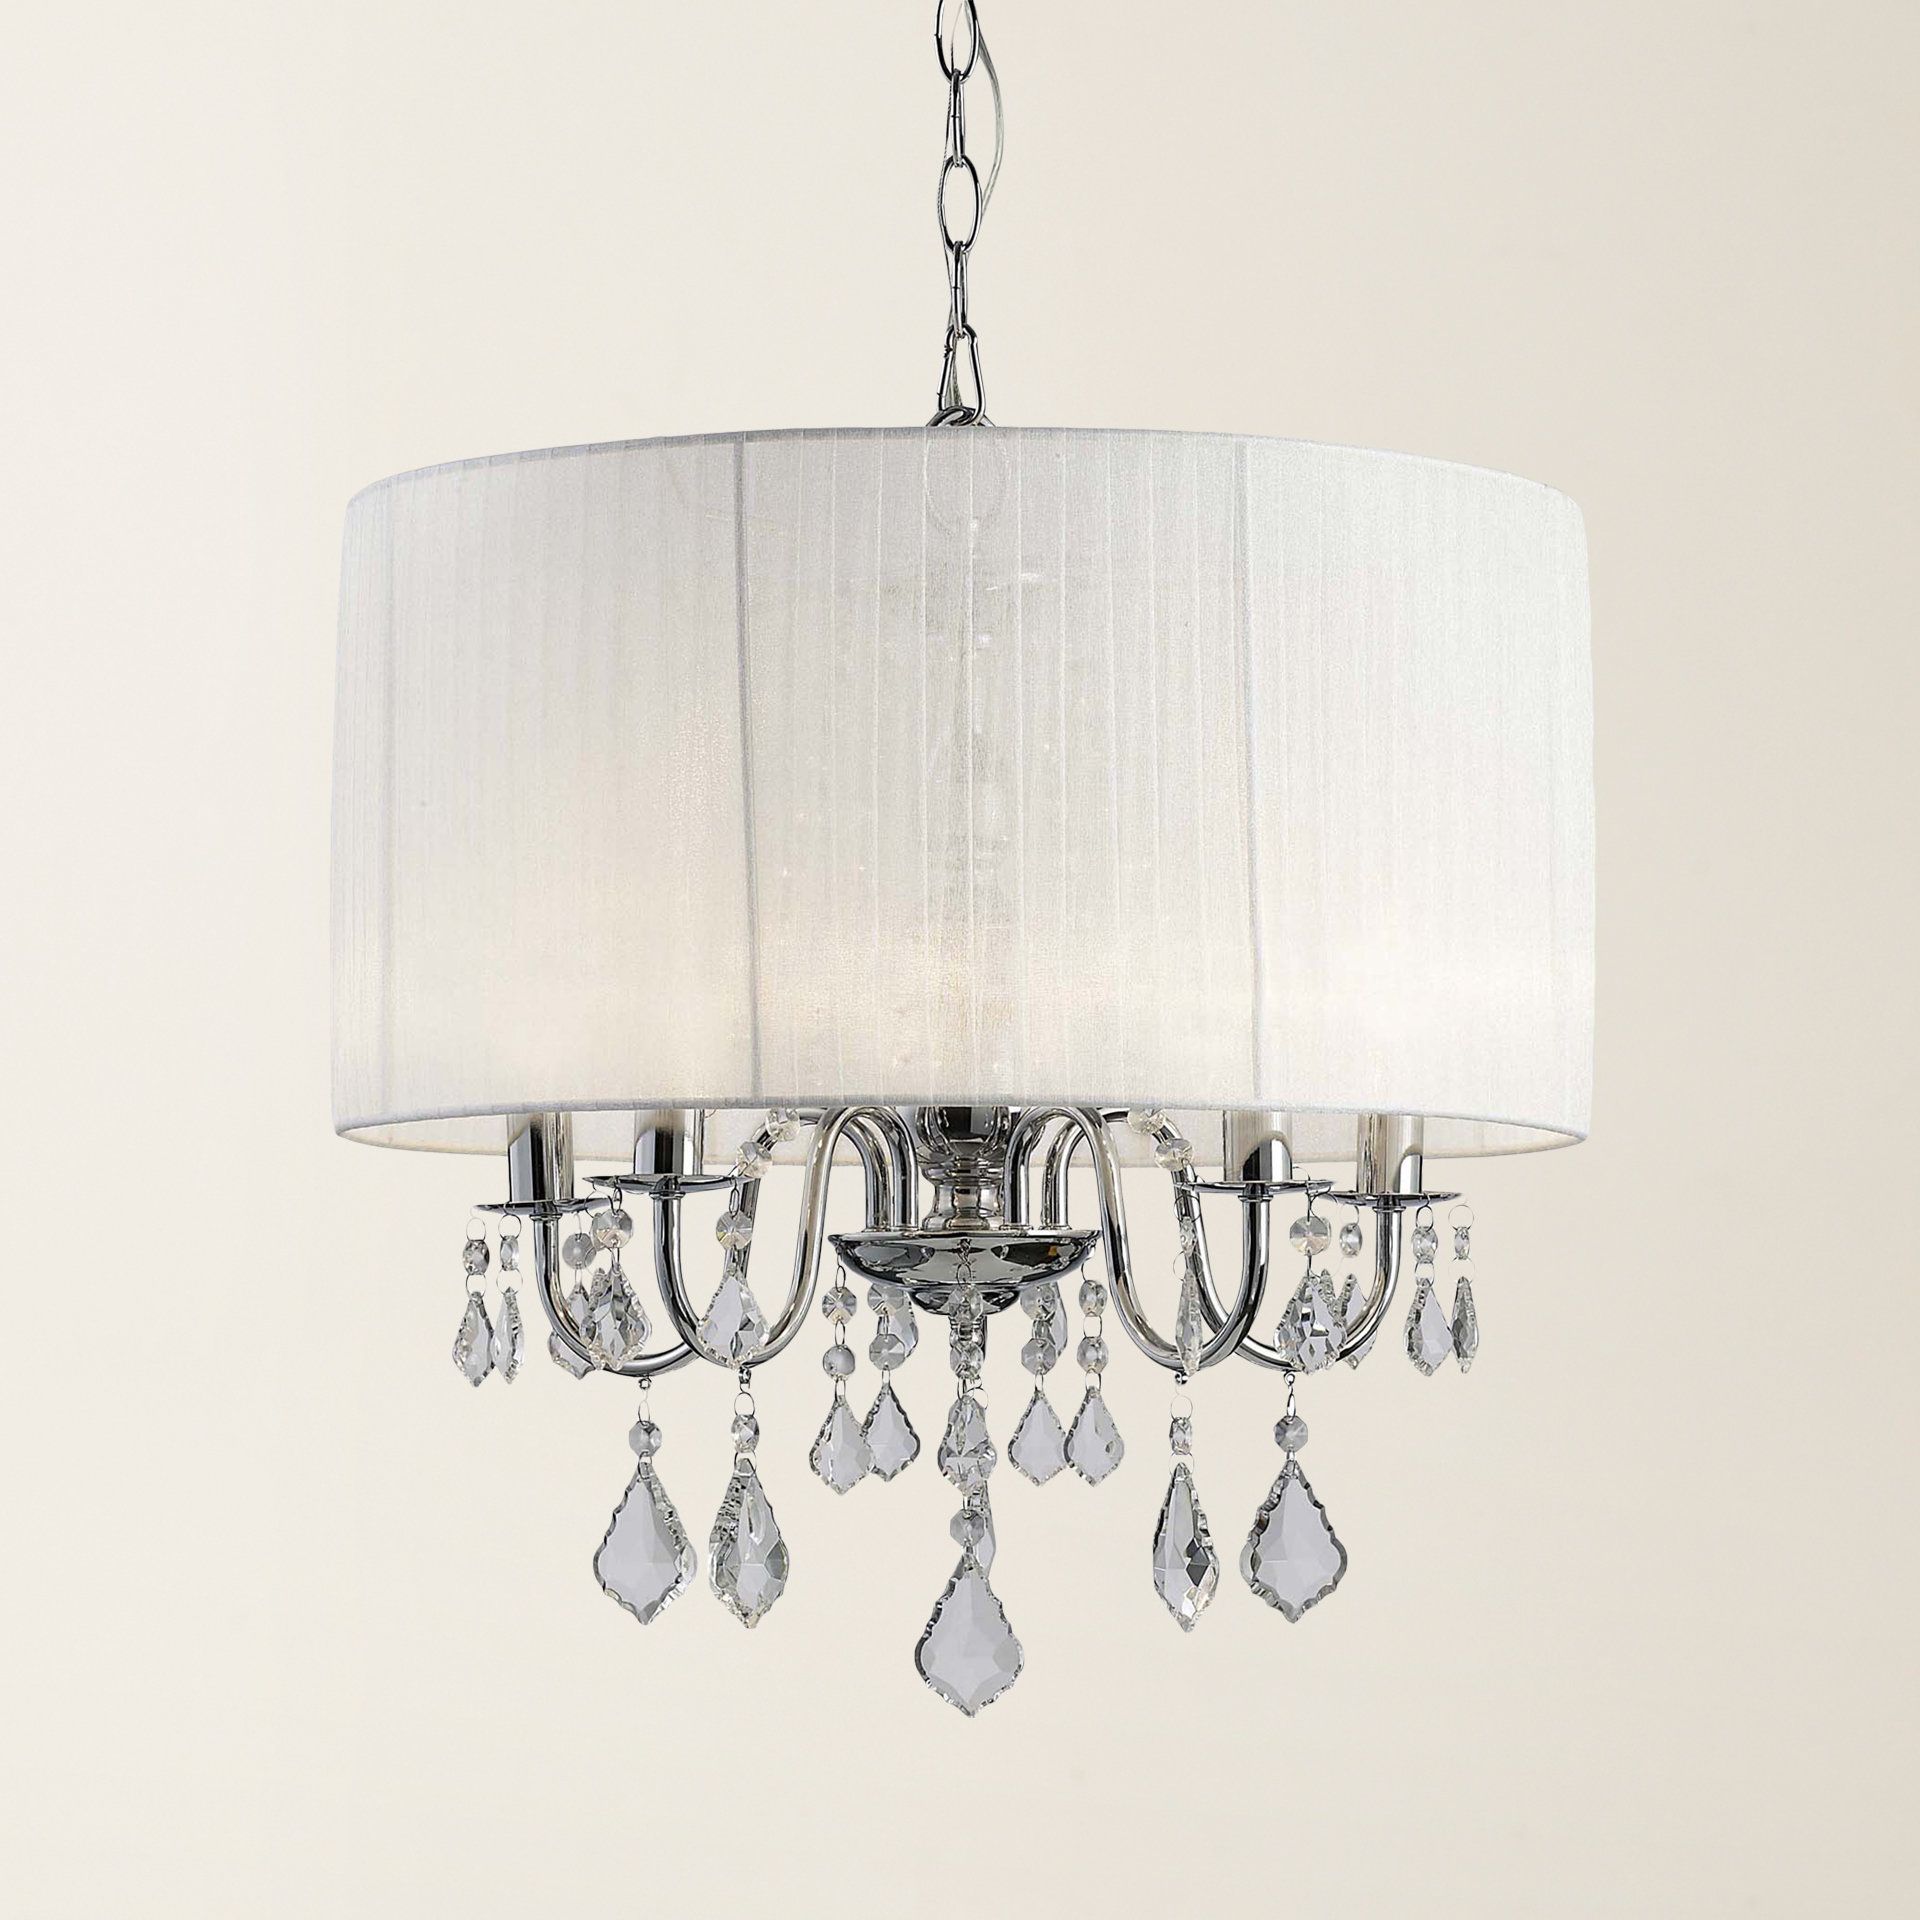 Fashionable Buster 5 Light Drum Chandelier In Buster 5 Light Drum Chandeliers (View 1 of 25)